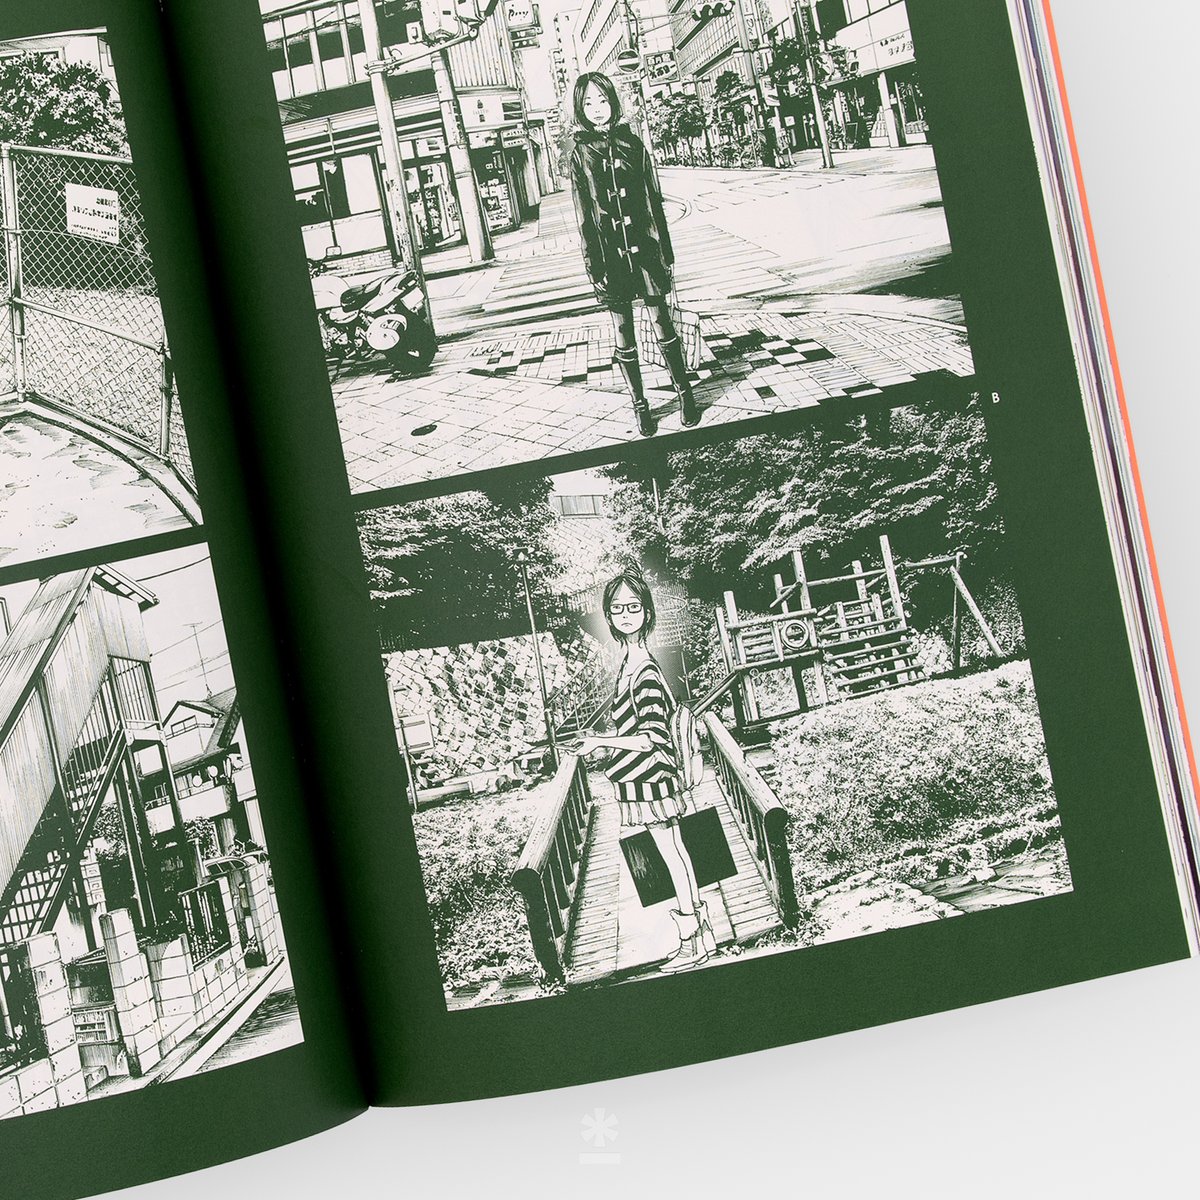 Ctrl+T : 浅野いにおWORKS Inio Asano's comprehensive collection! 48 pages of manga, 'Himawari,' 'Haruyokoi,' not in original. Unseen artworks, color illustrations, feature pages. things.gallery/collections/bo…浅野いにお-works